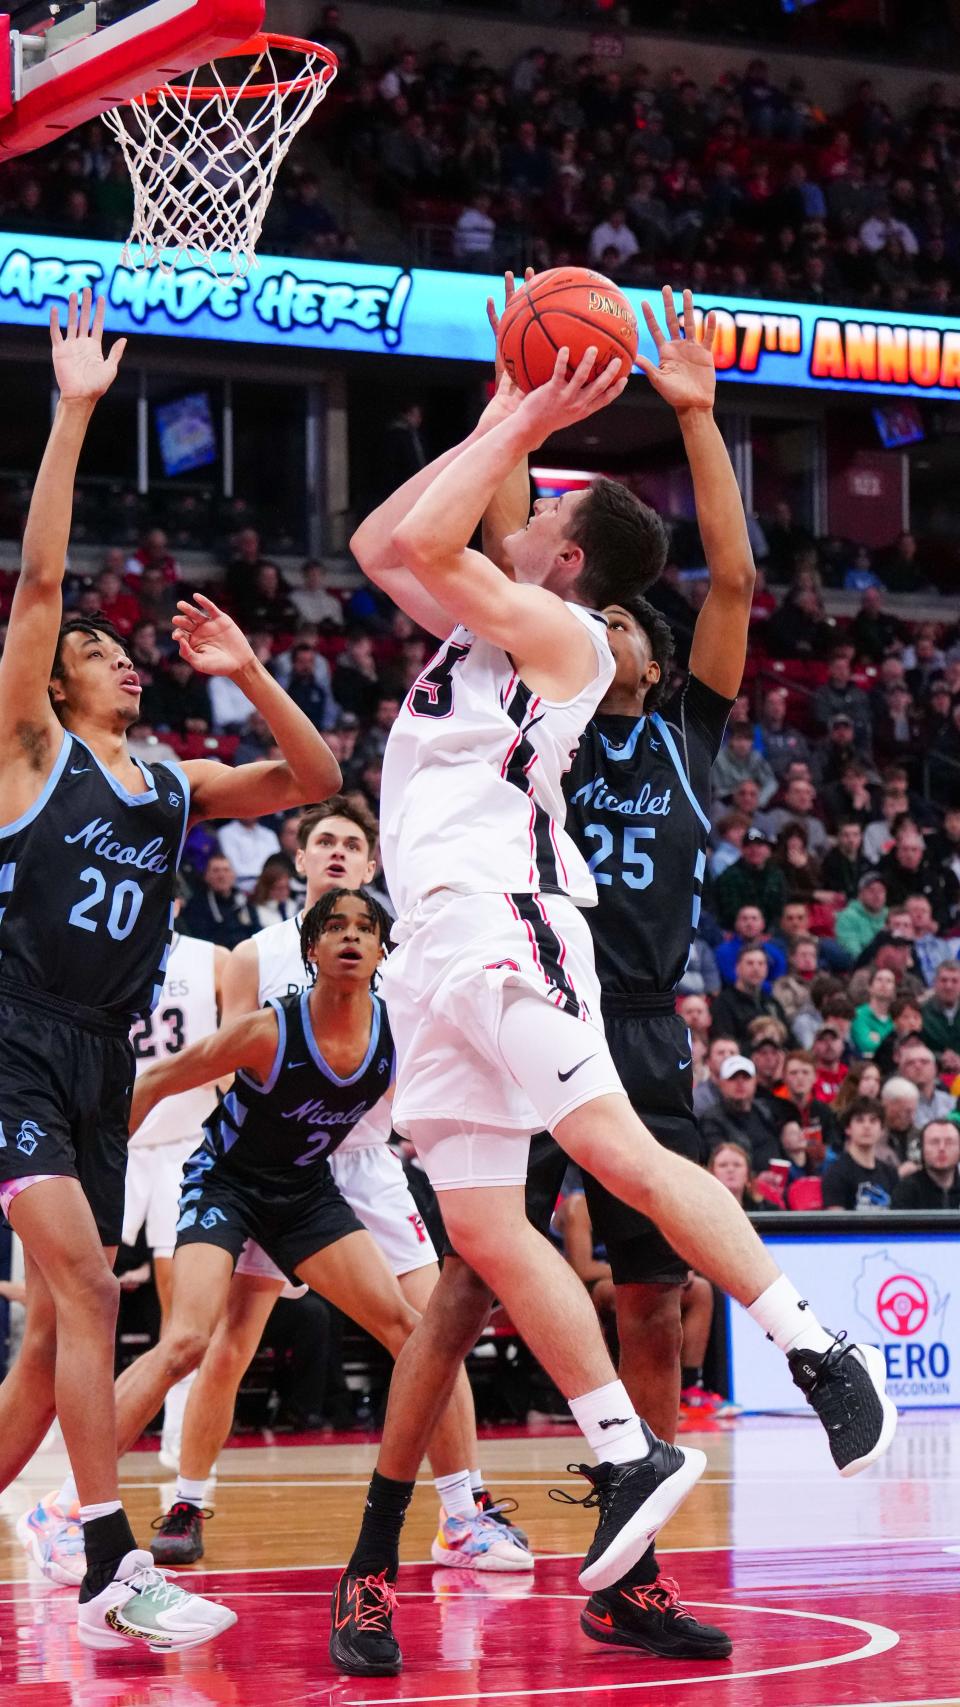 Pewaukee's Nick Janowski (25) elevates for two during the WIAA Division 2 state boys basketball semifinal against Nicolet at the Kohl Center in Madison on Friday, March 17, 2023.